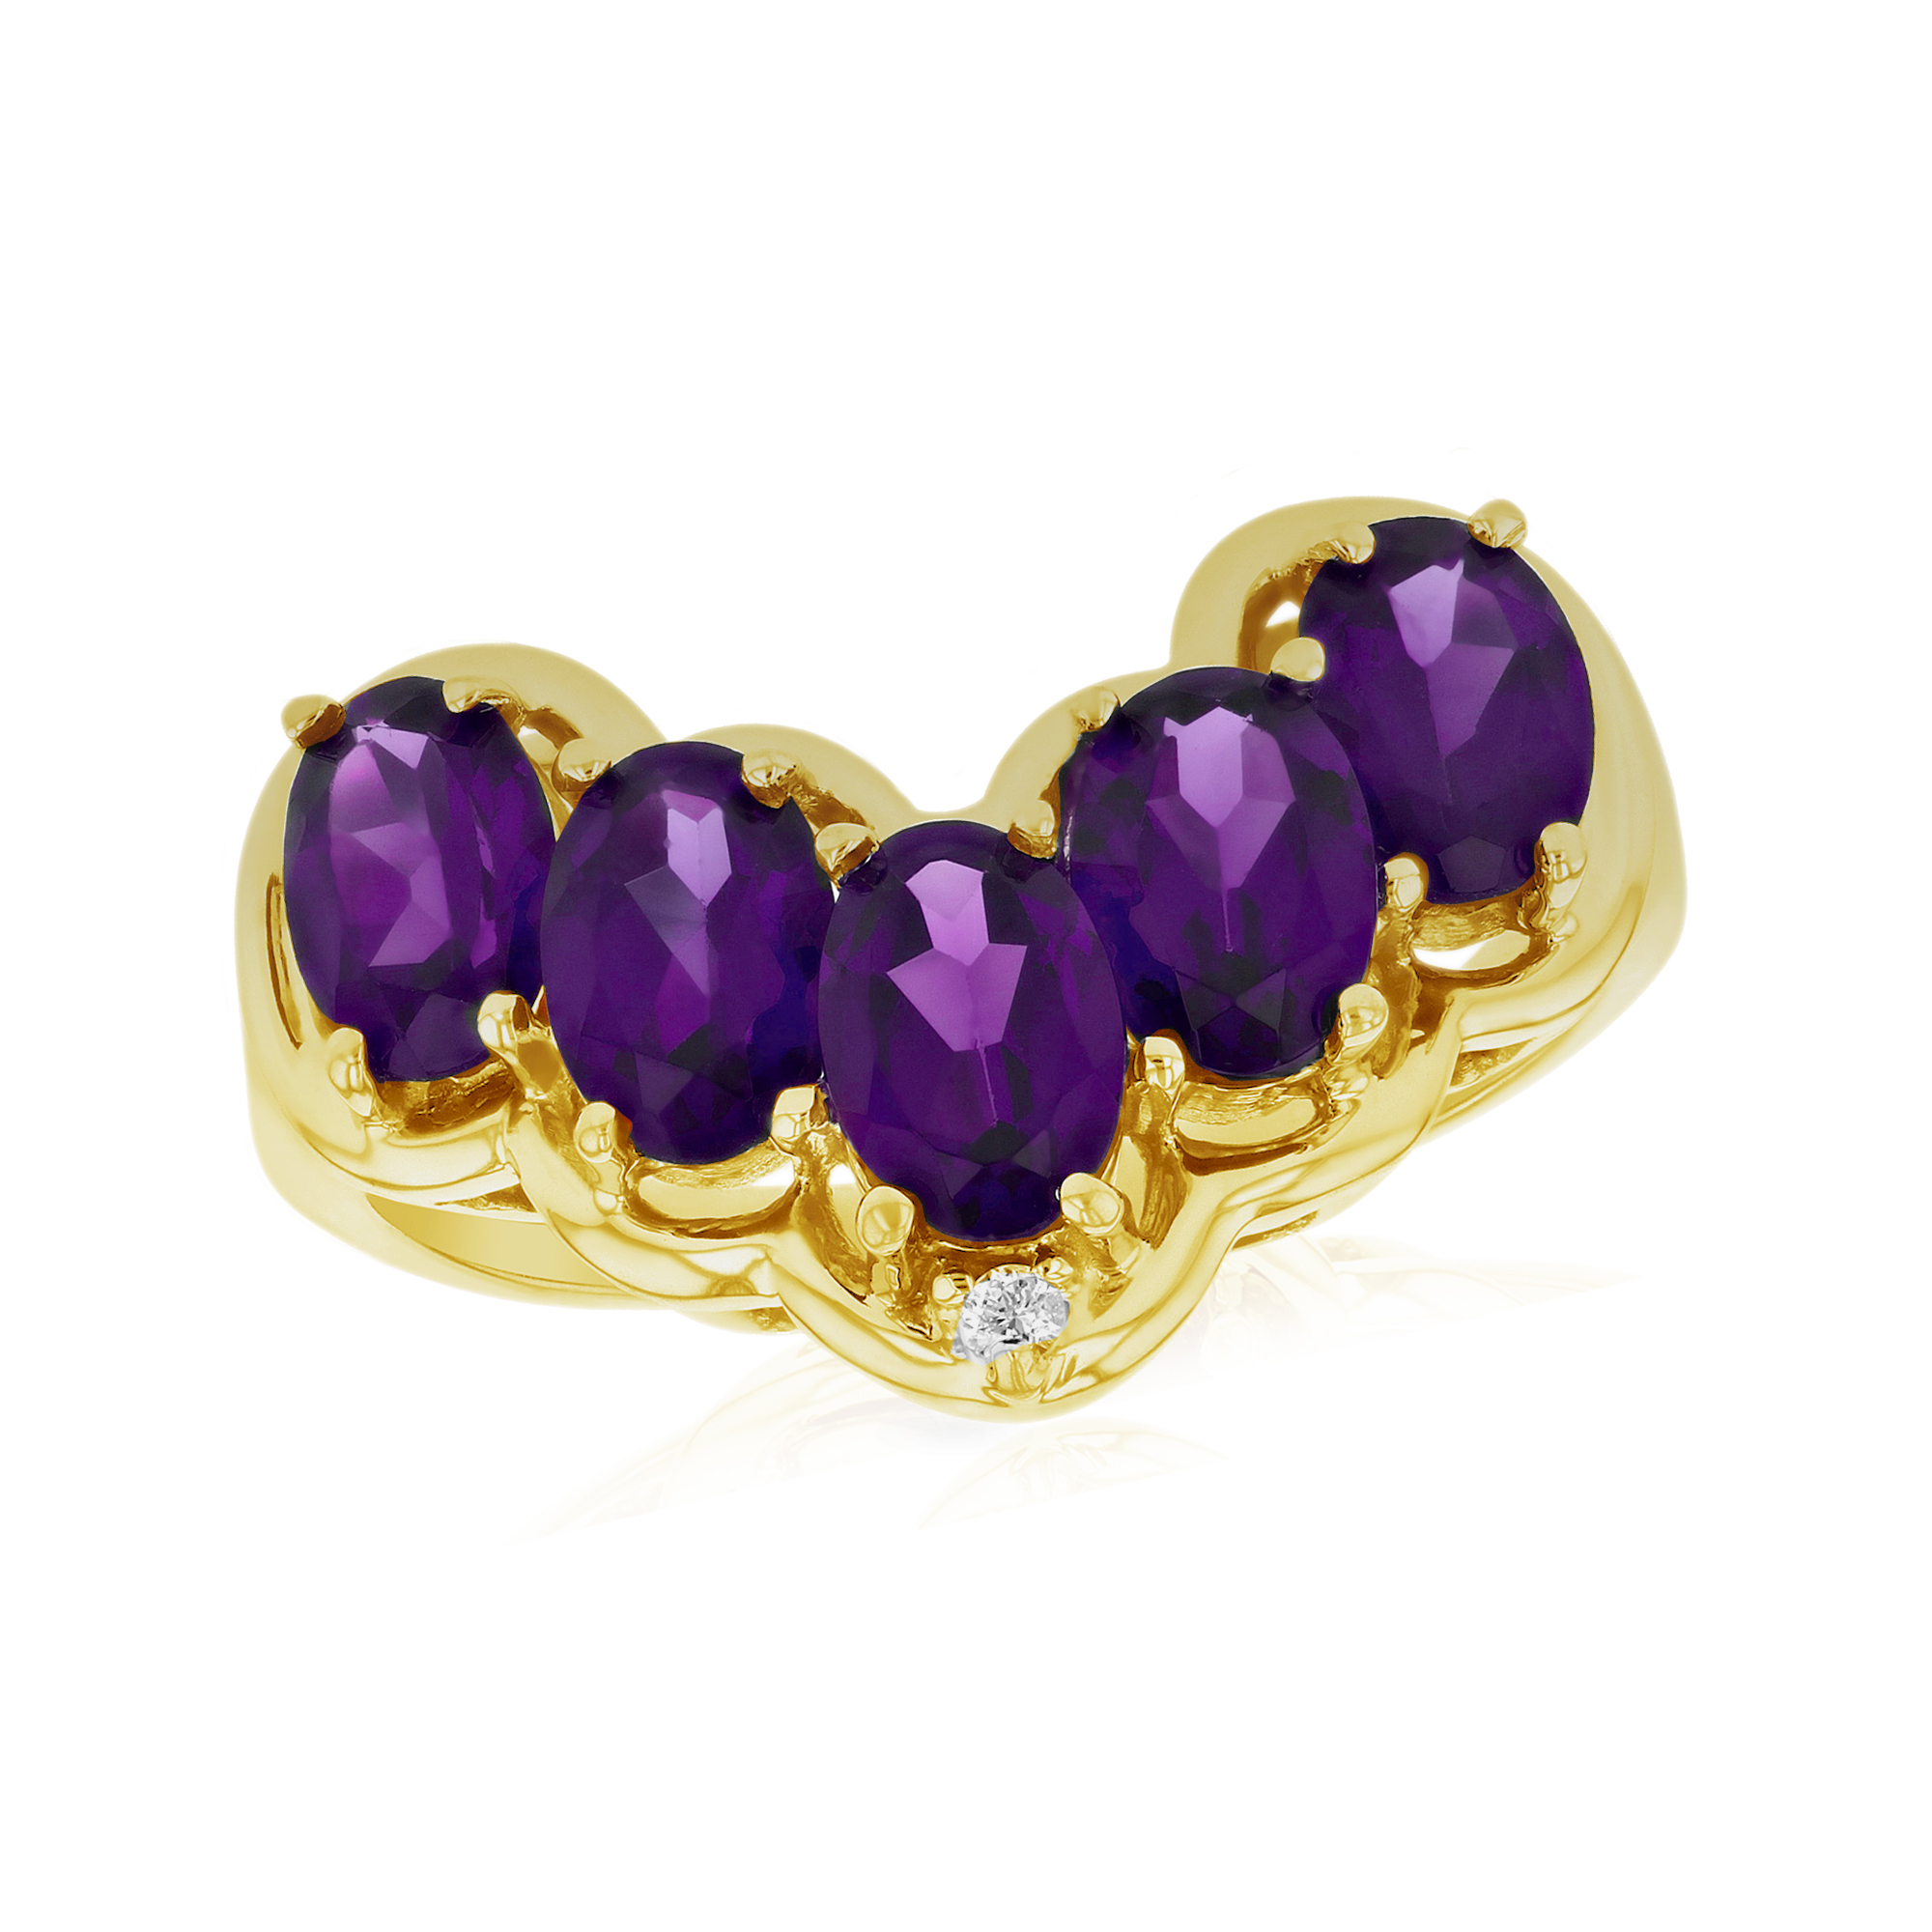 View 0.01ctw Diamond and Amethyst Fashion ring in 14k Yellow Gold